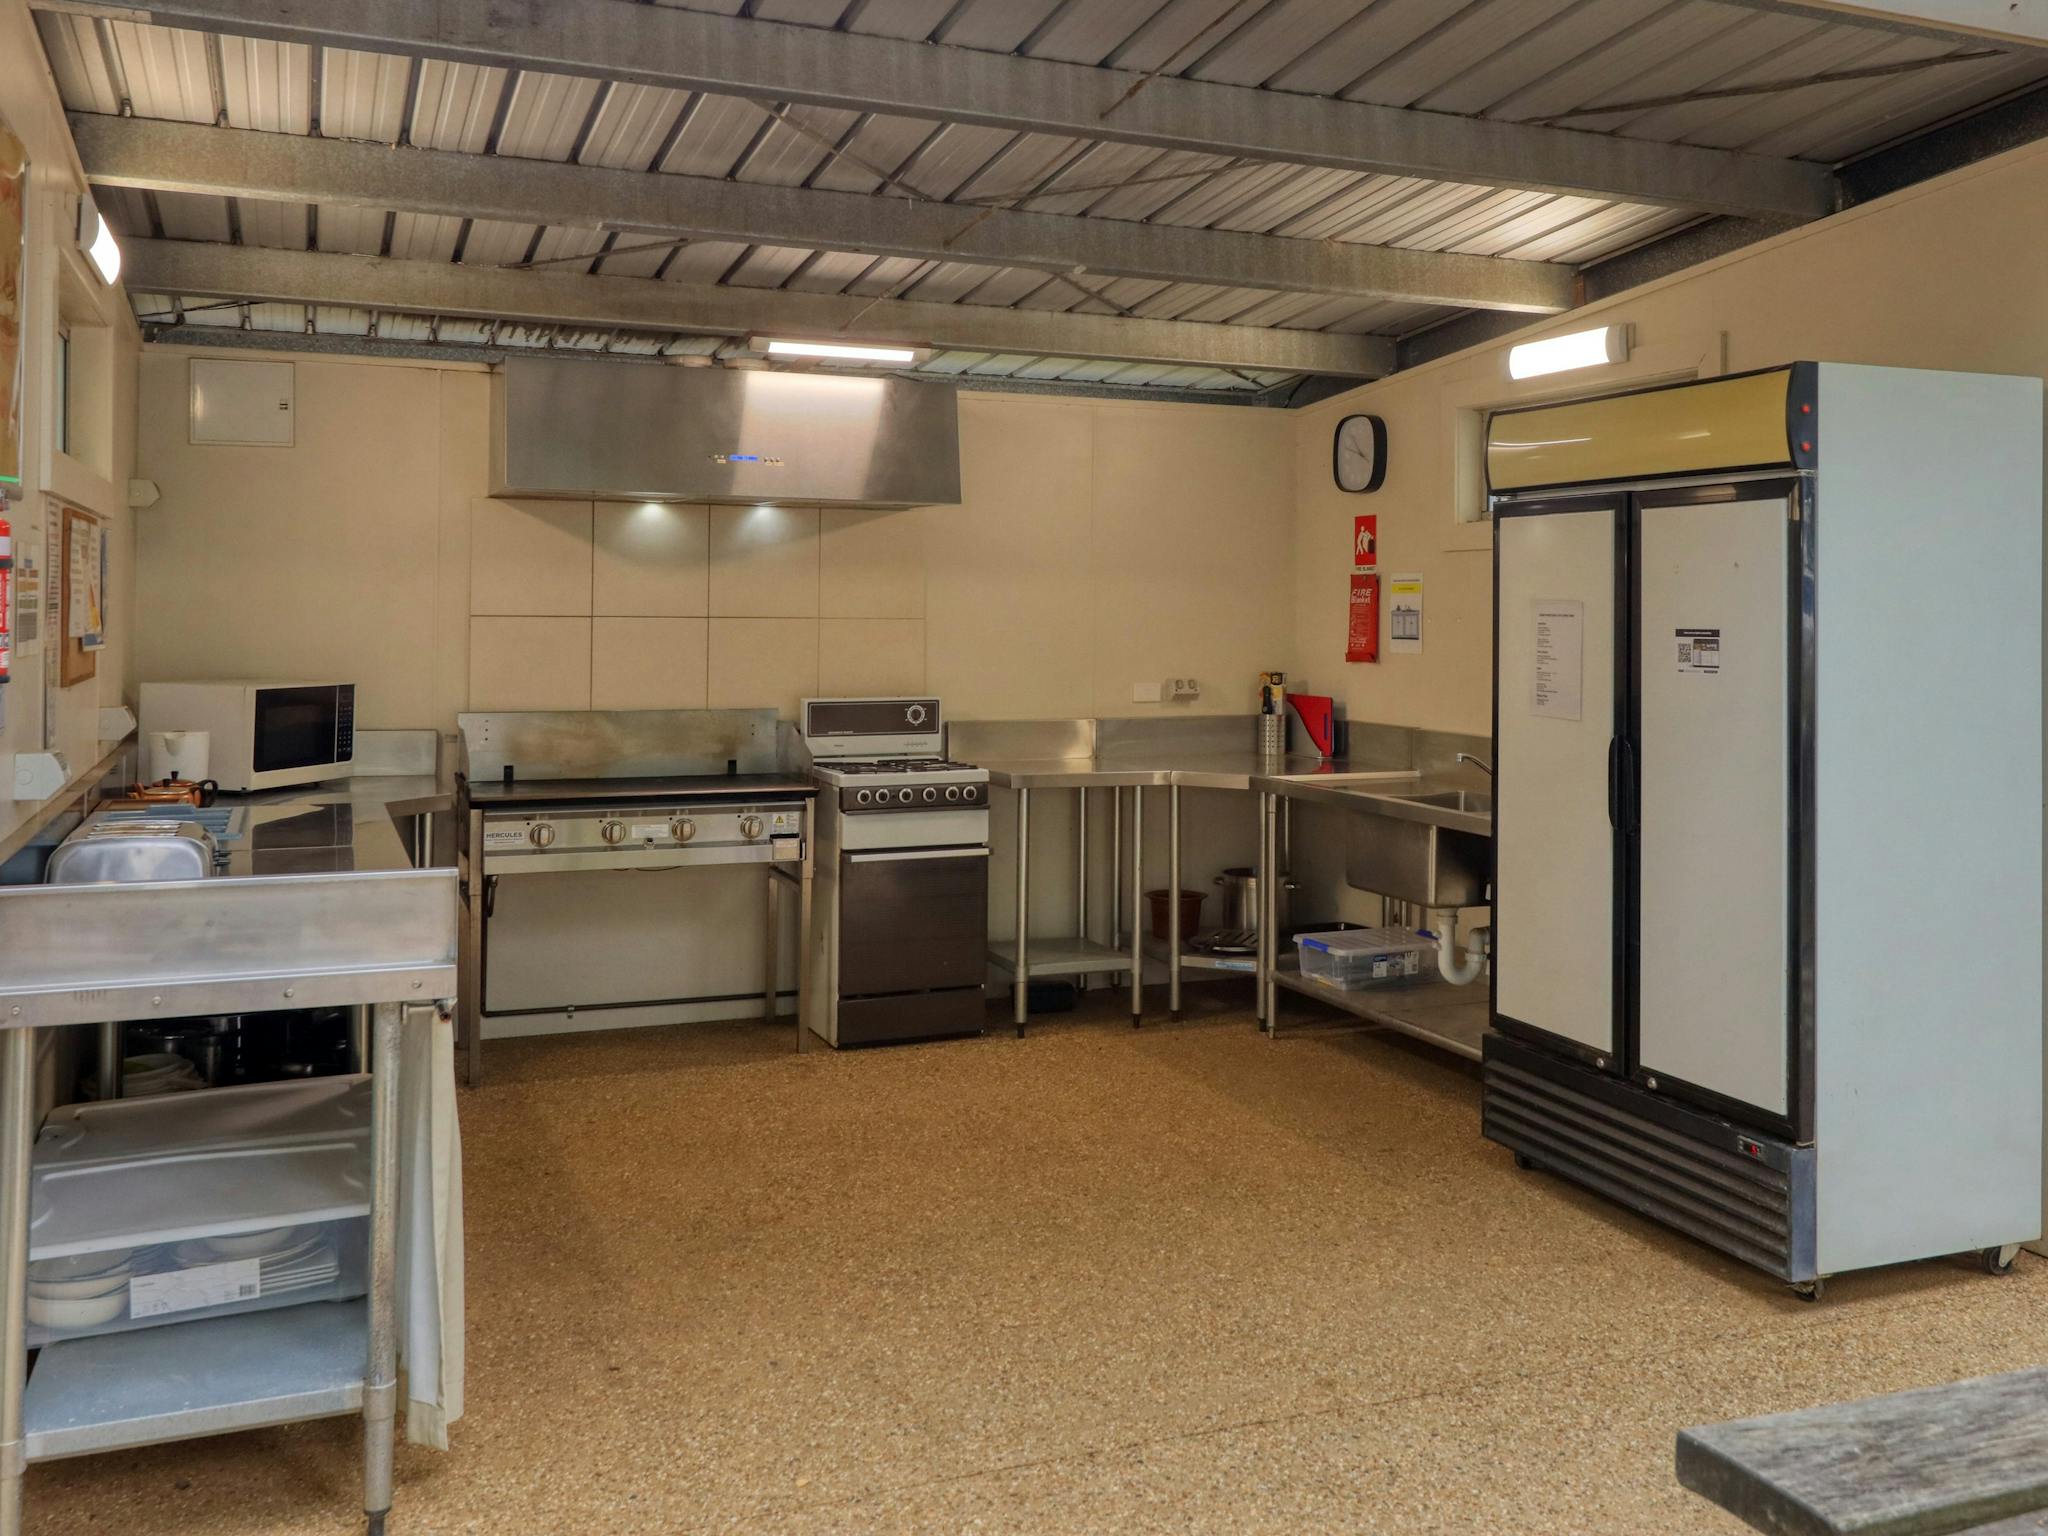 Camp kitchen facilities caters for all needs